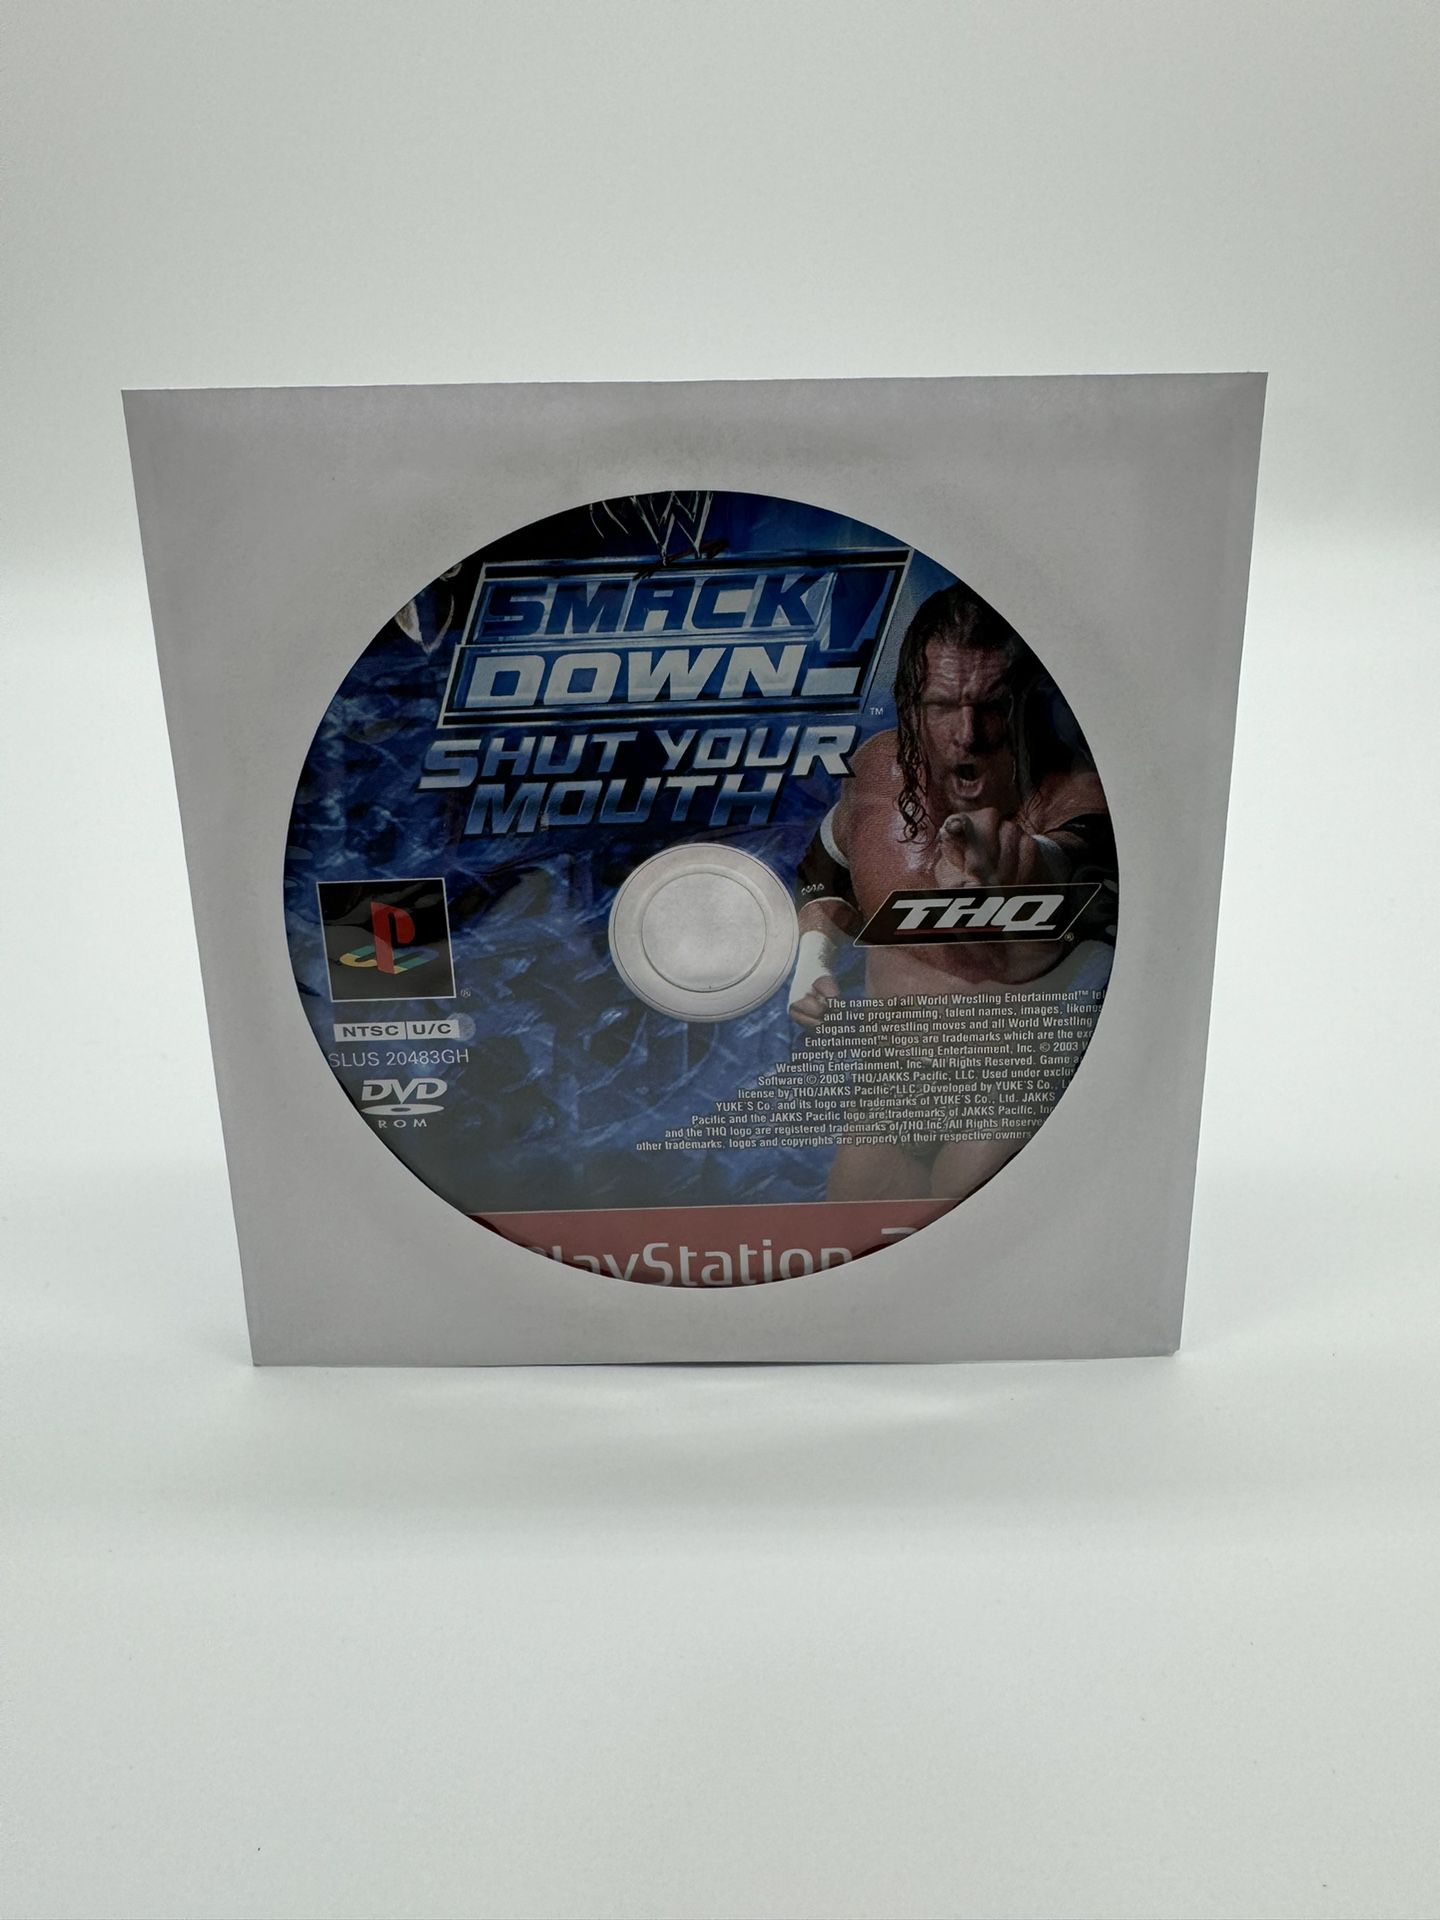 WWE SmackDown Shut Your Mouth Greatest Hits (Sony PlayStation 2 , PS2) Disc Only